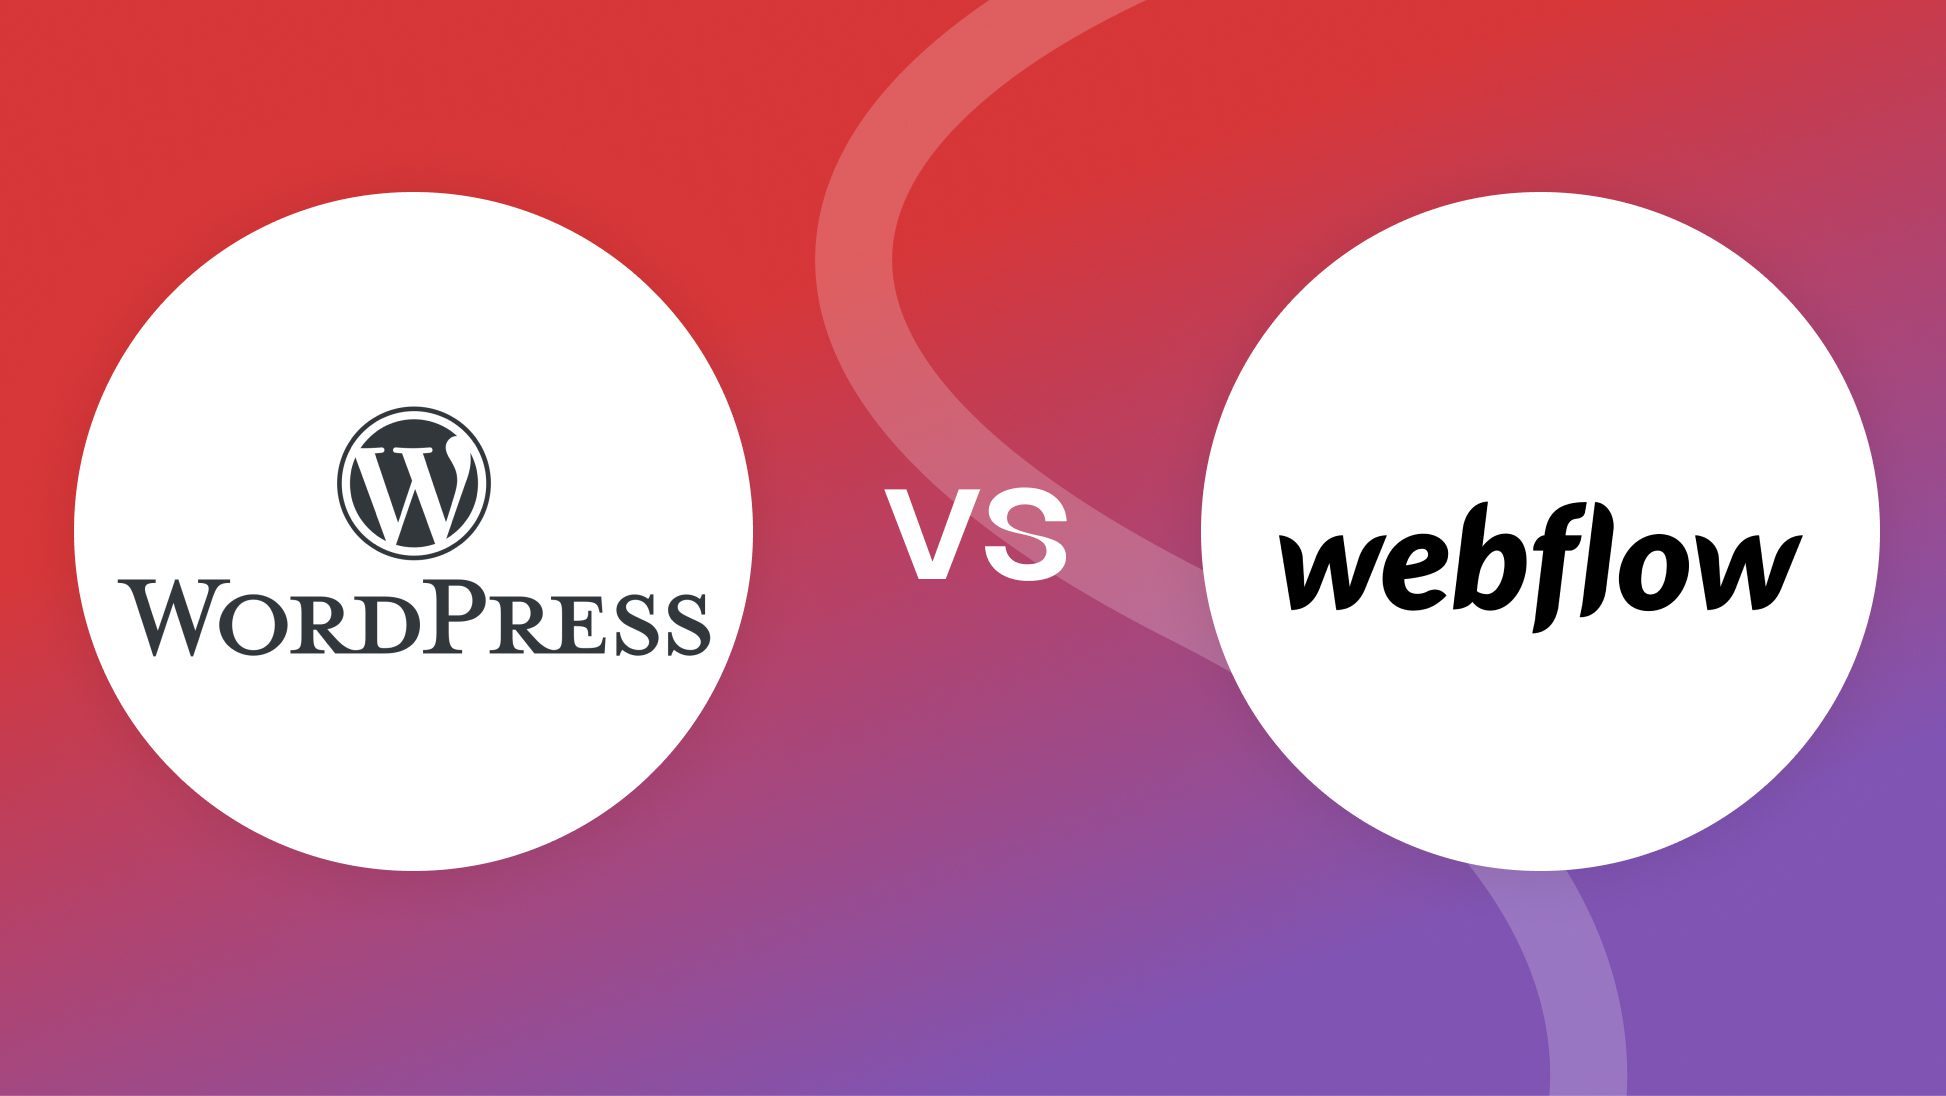 Which is better for creating websites, WordPress or Webflow?